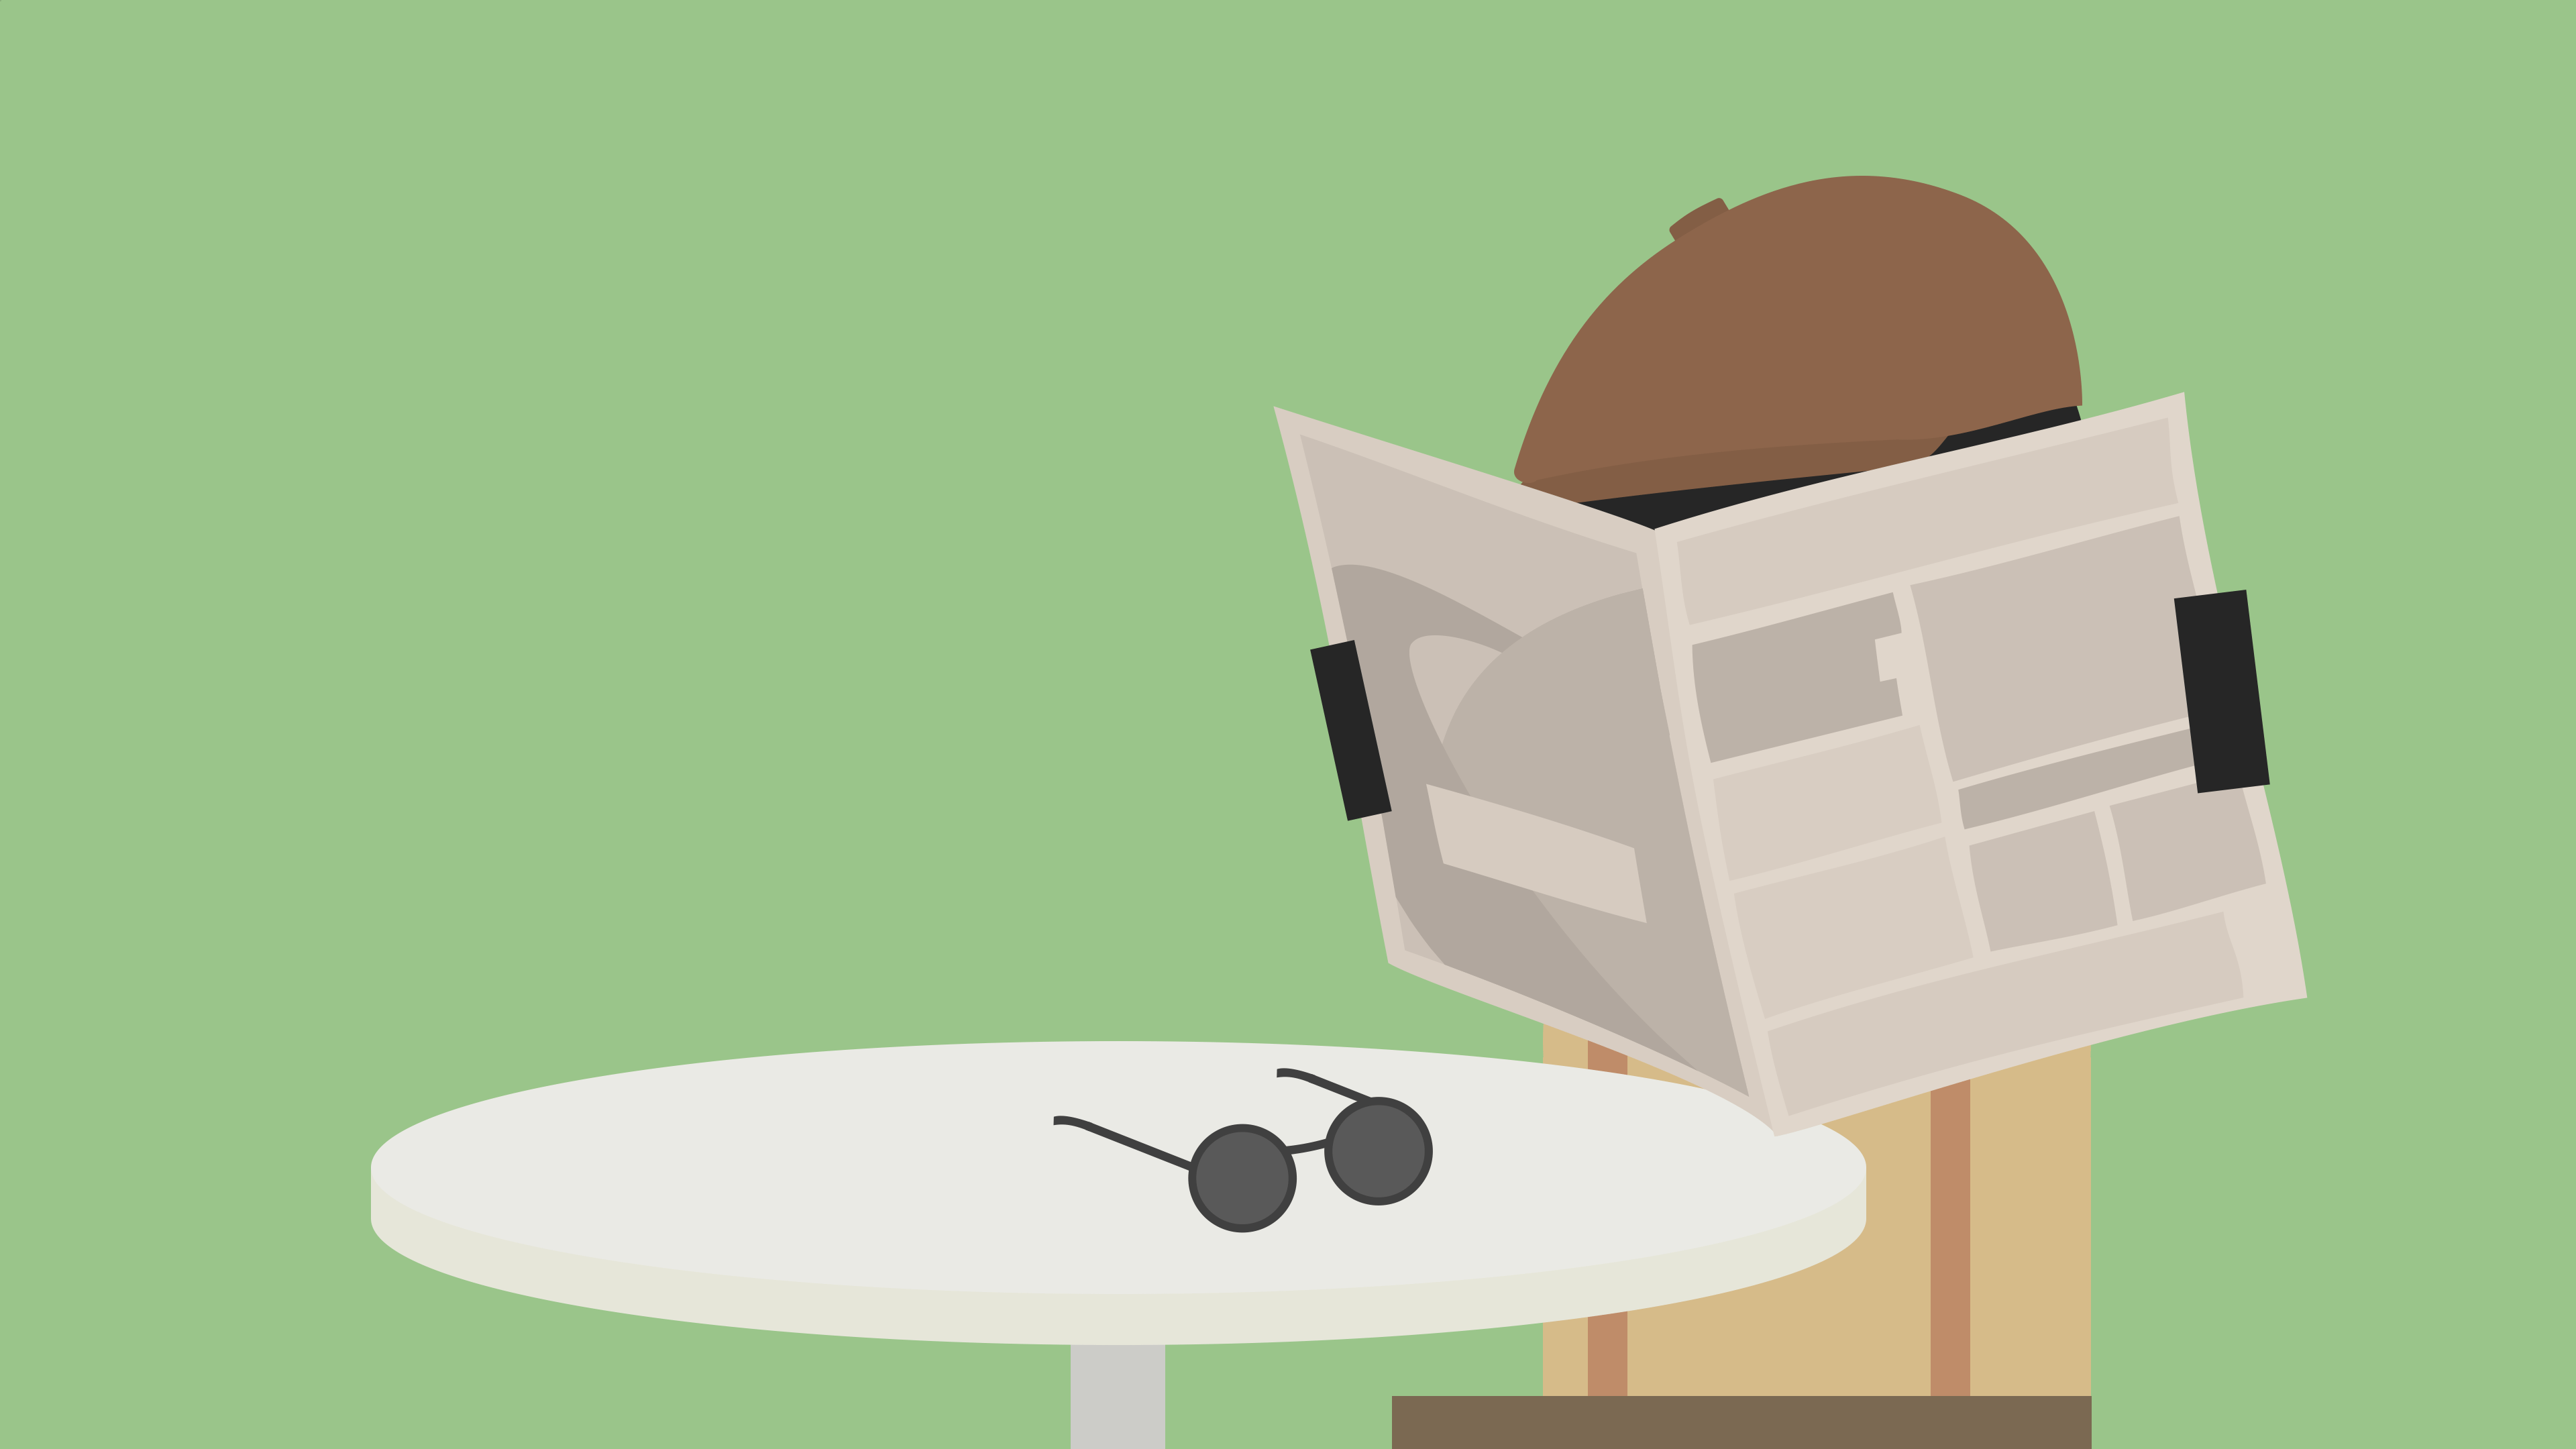 An old man tries to read his newspaper, but is struggling because of his poor eyesight.
